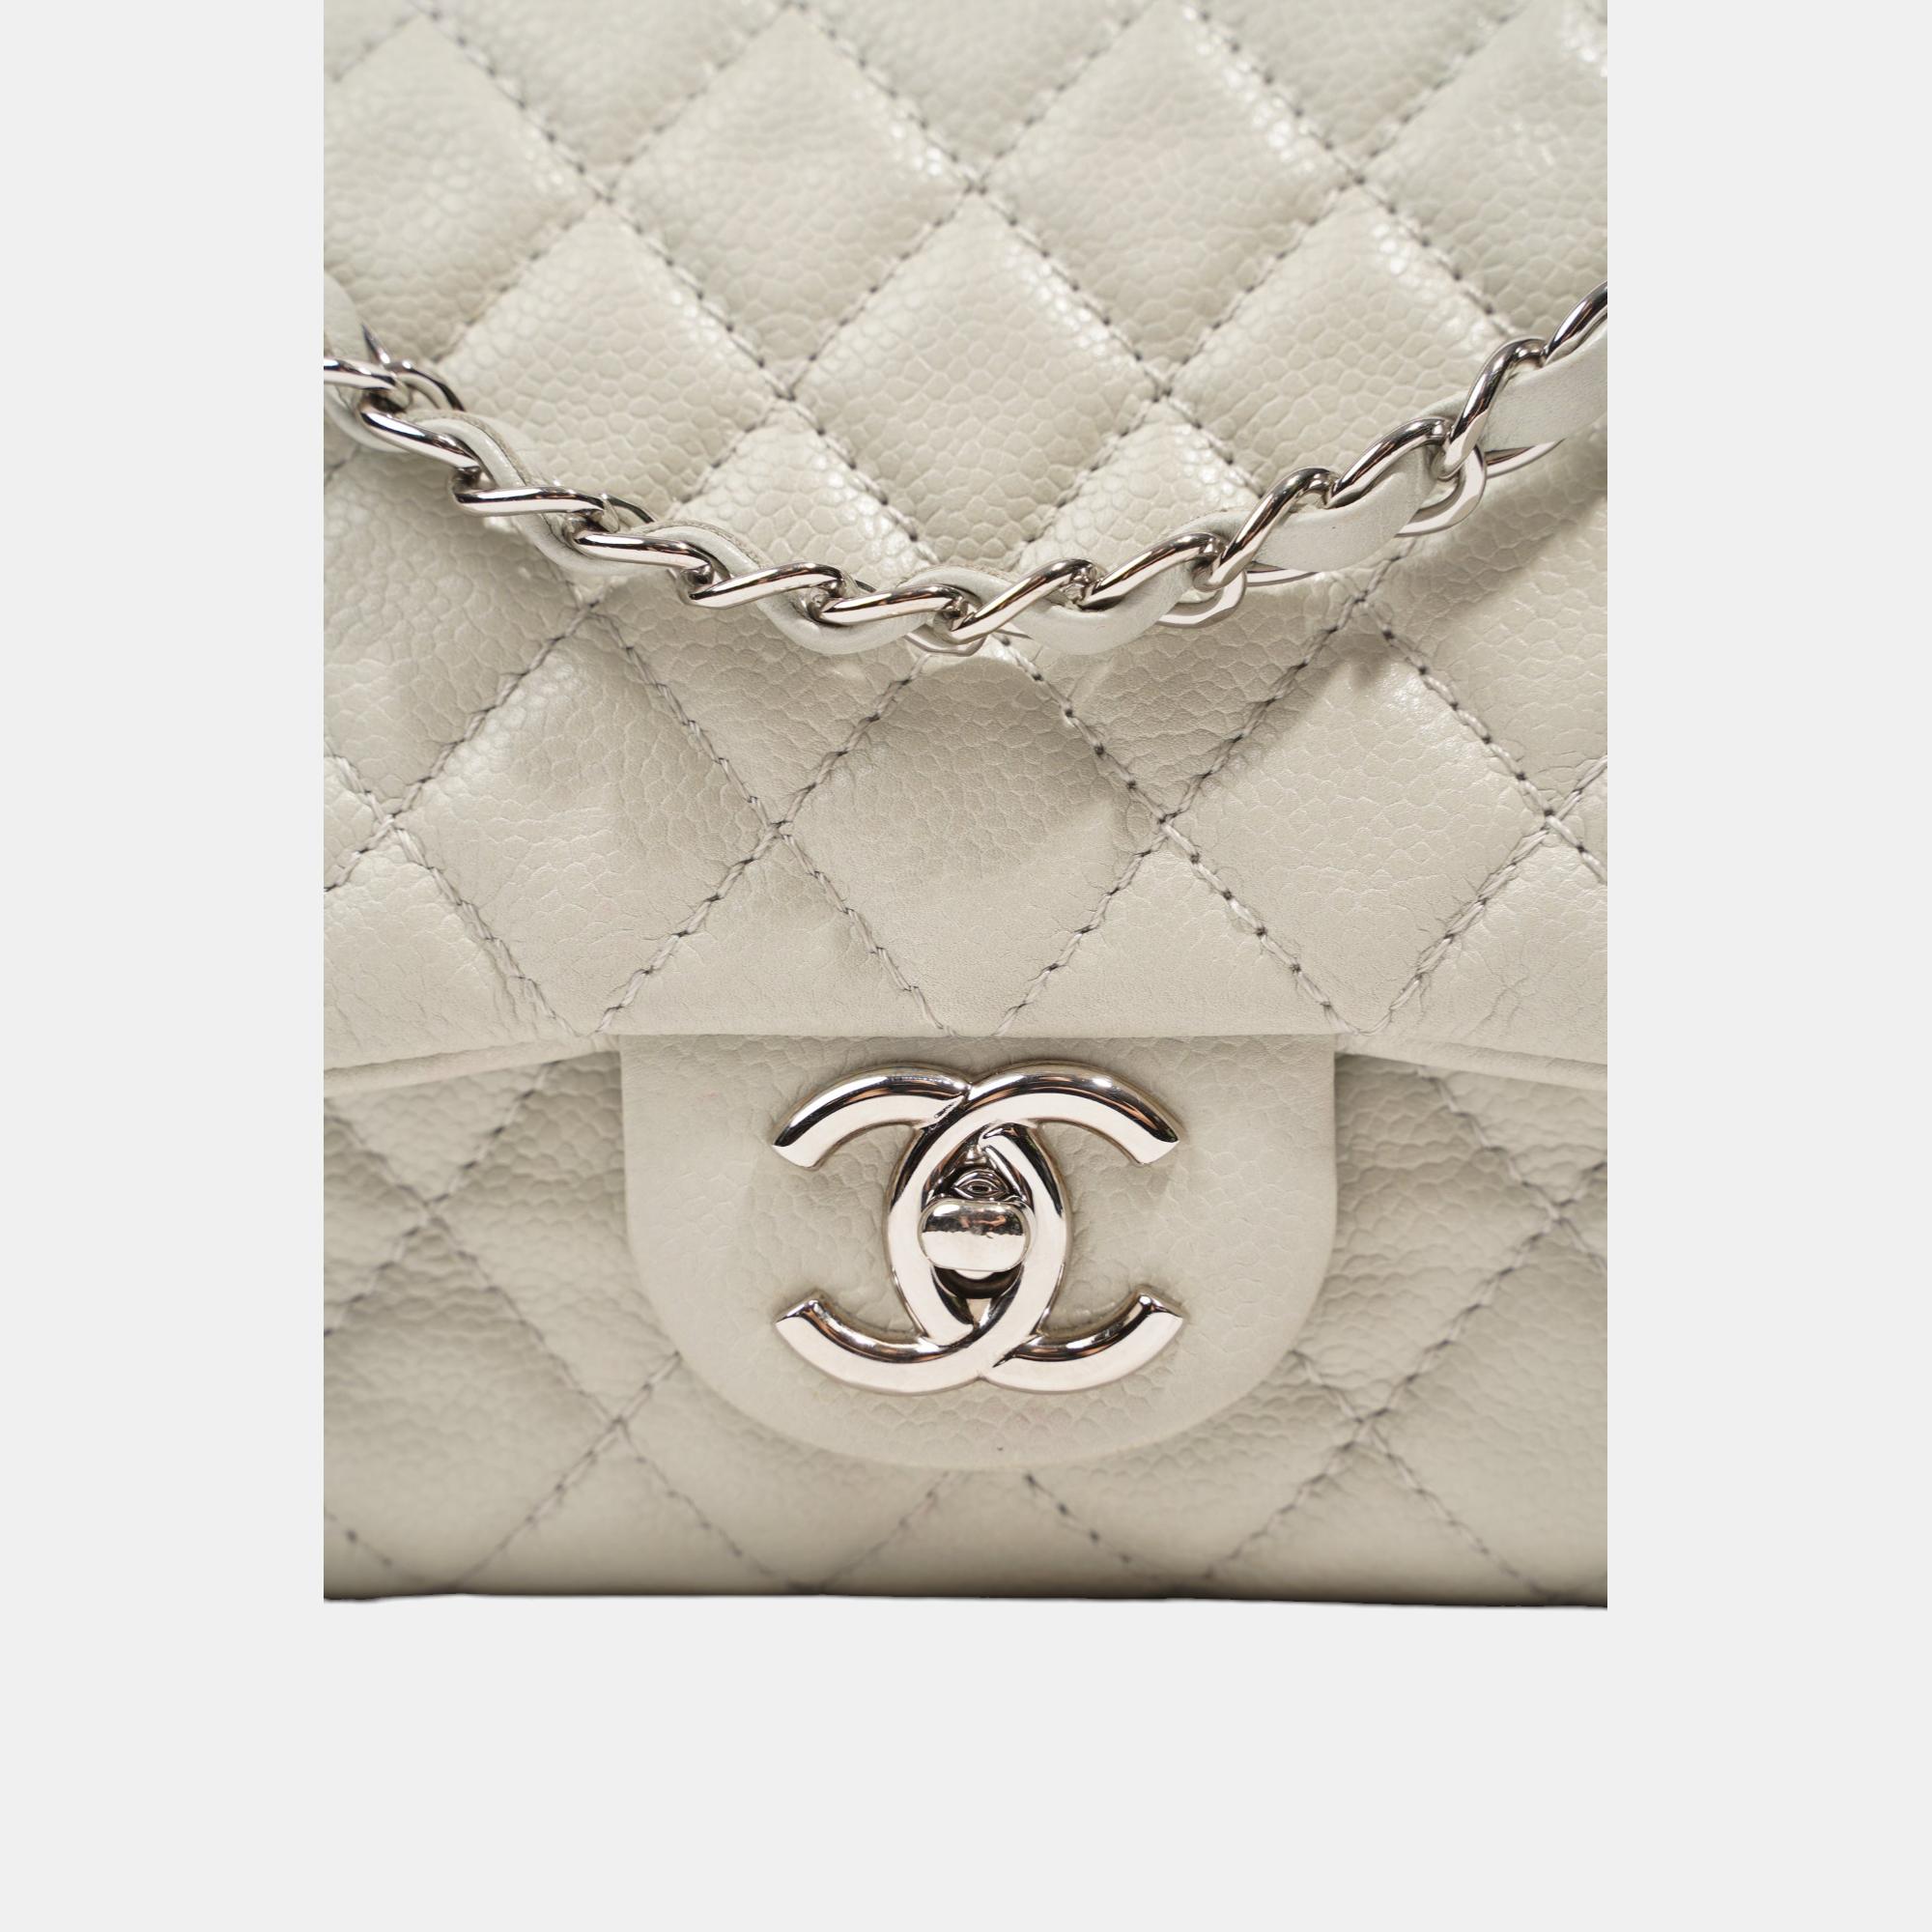 Chanel Quilted Caviar Leather Classic Double Flap Medium